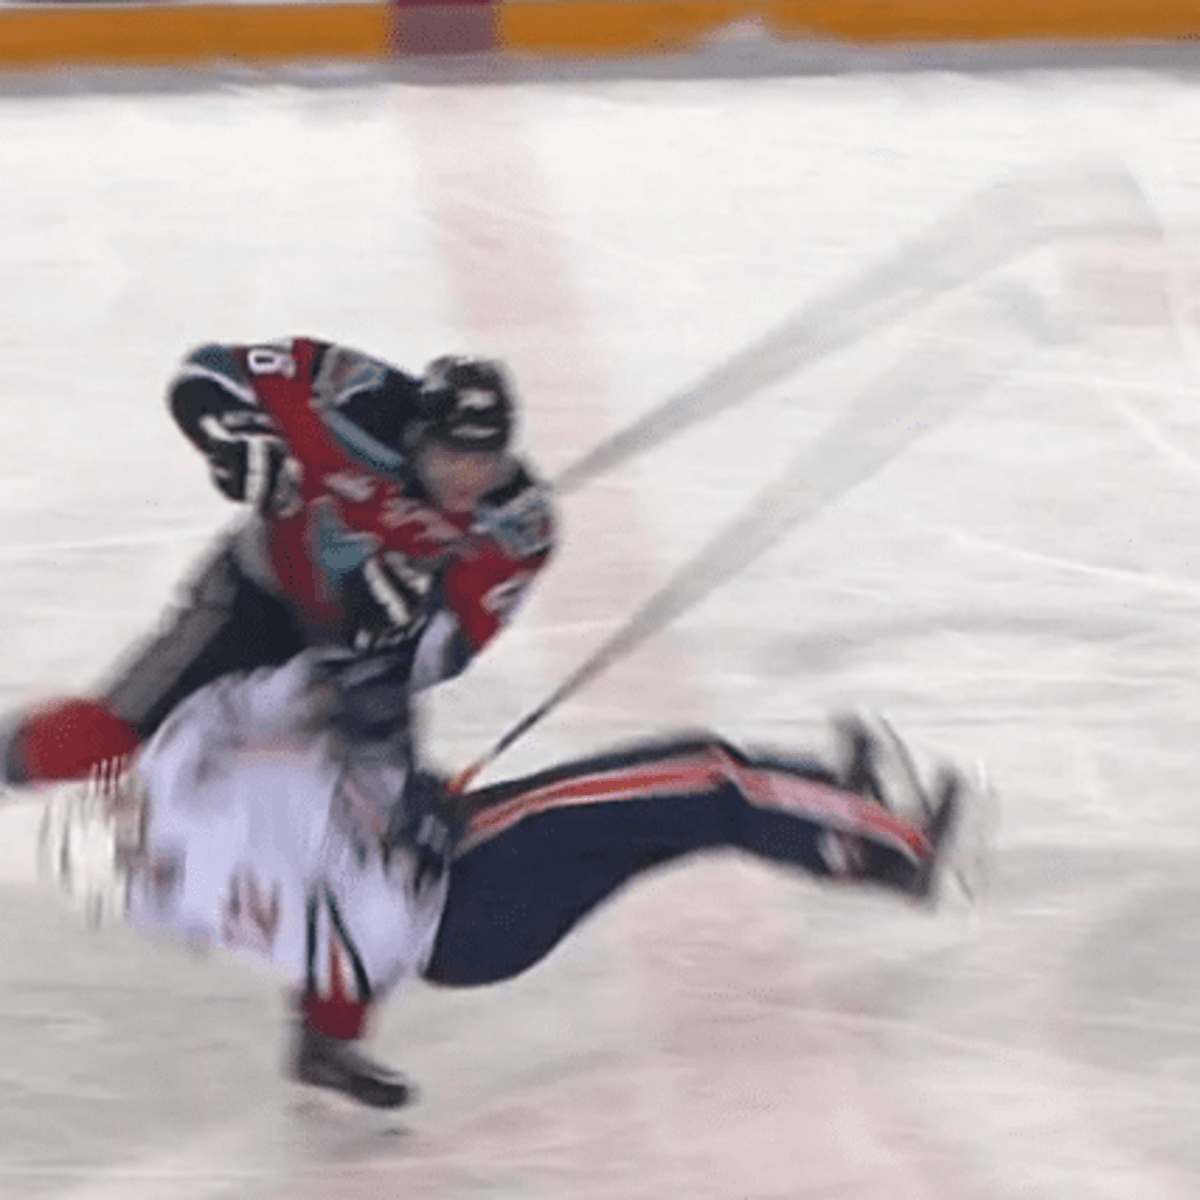 Watch WHL player nearly get flipped by massive neutral zone hit